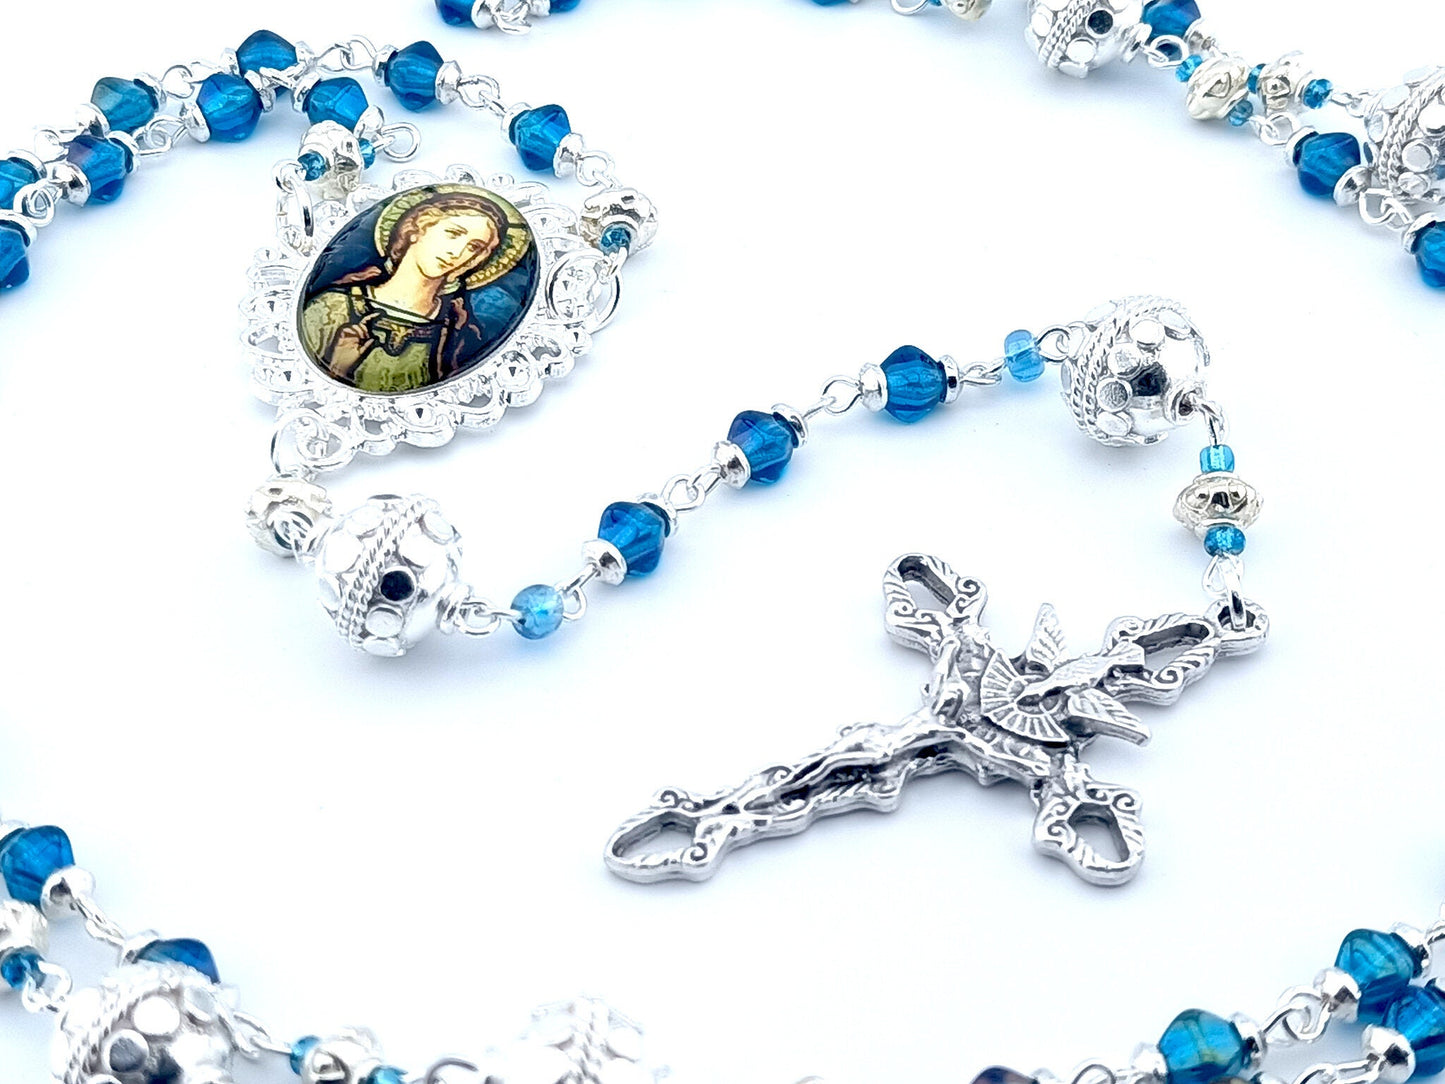 Angel Gabriel unique rosary beads with blue glass beads, silver pater beads, Holy Spirit crucifix and picture centre medal.